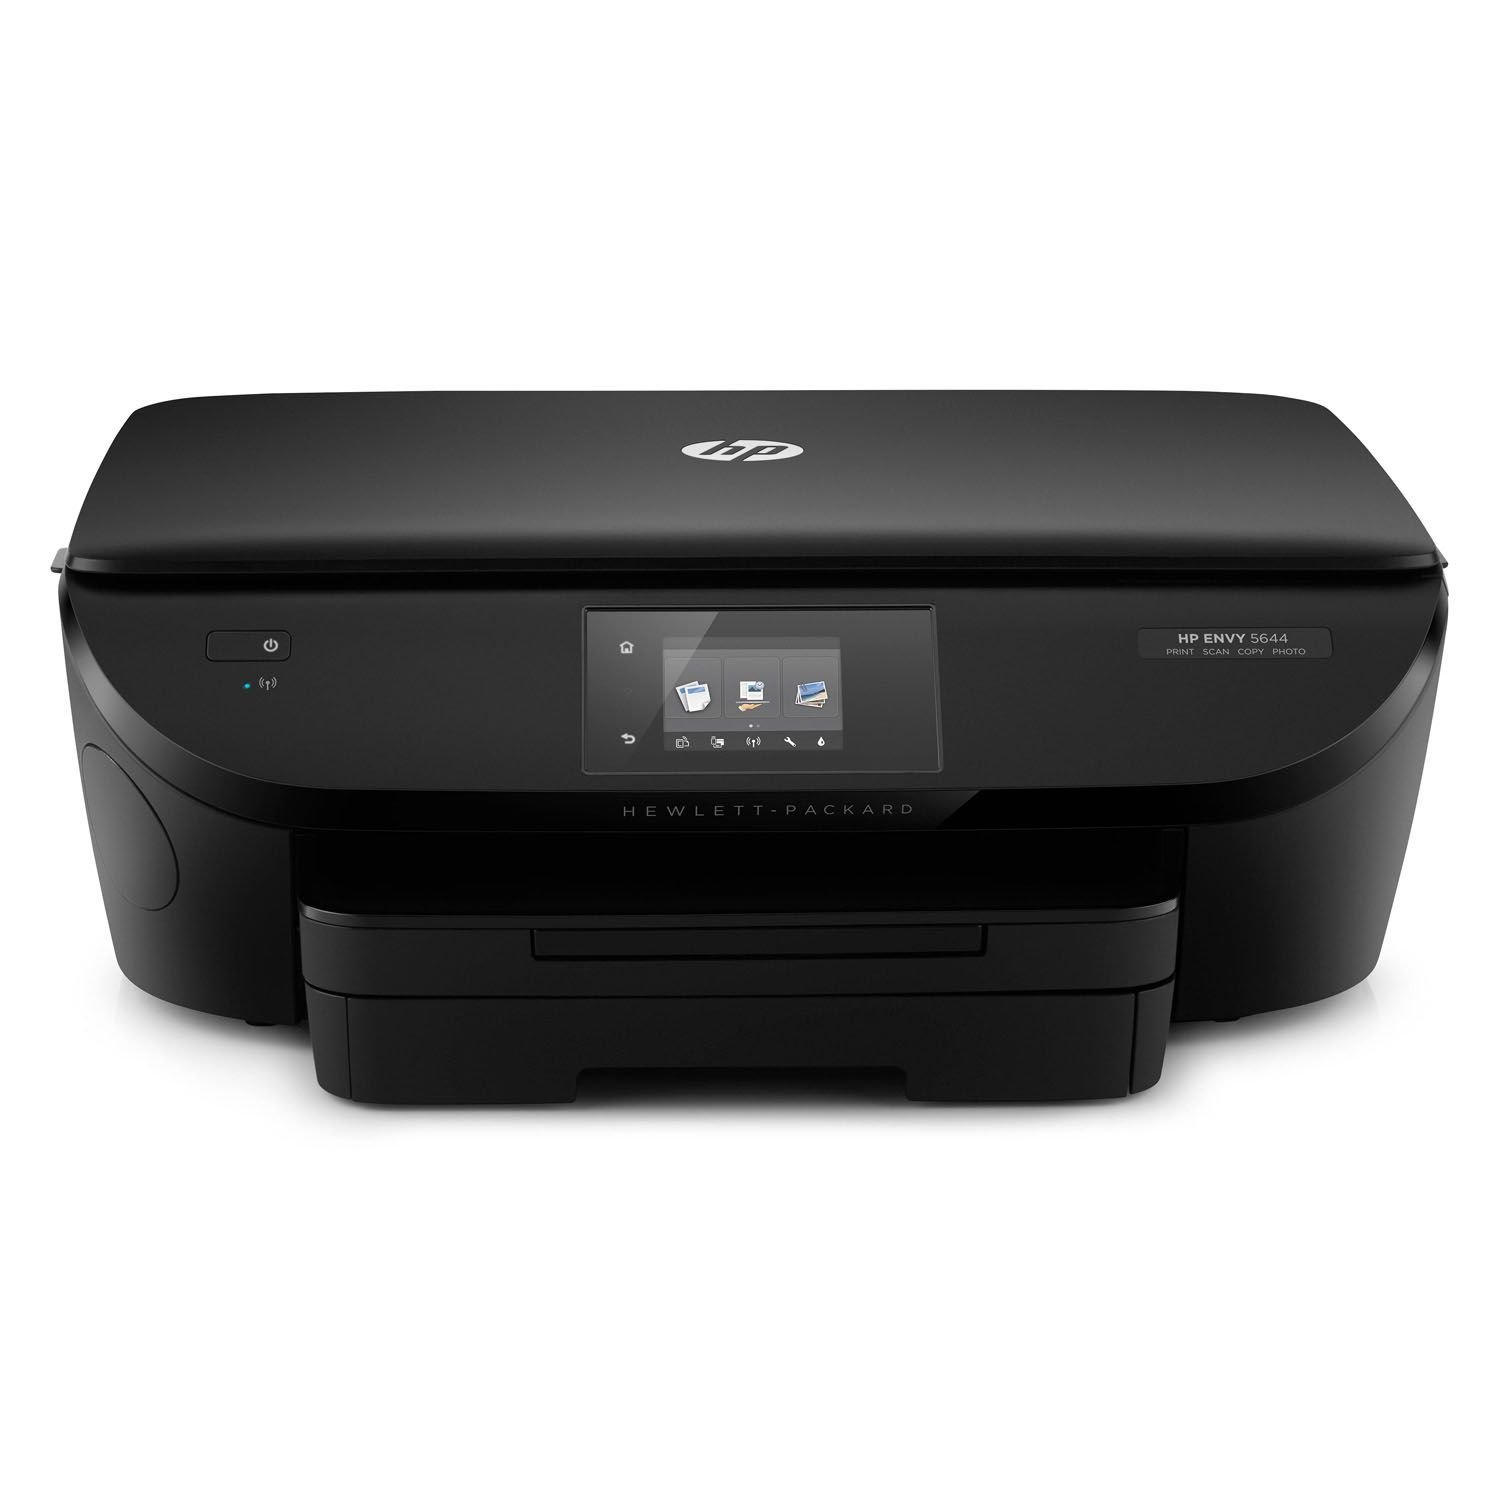 HP ENVY 5643 Driver For Windows And Mac Download | Printer ...